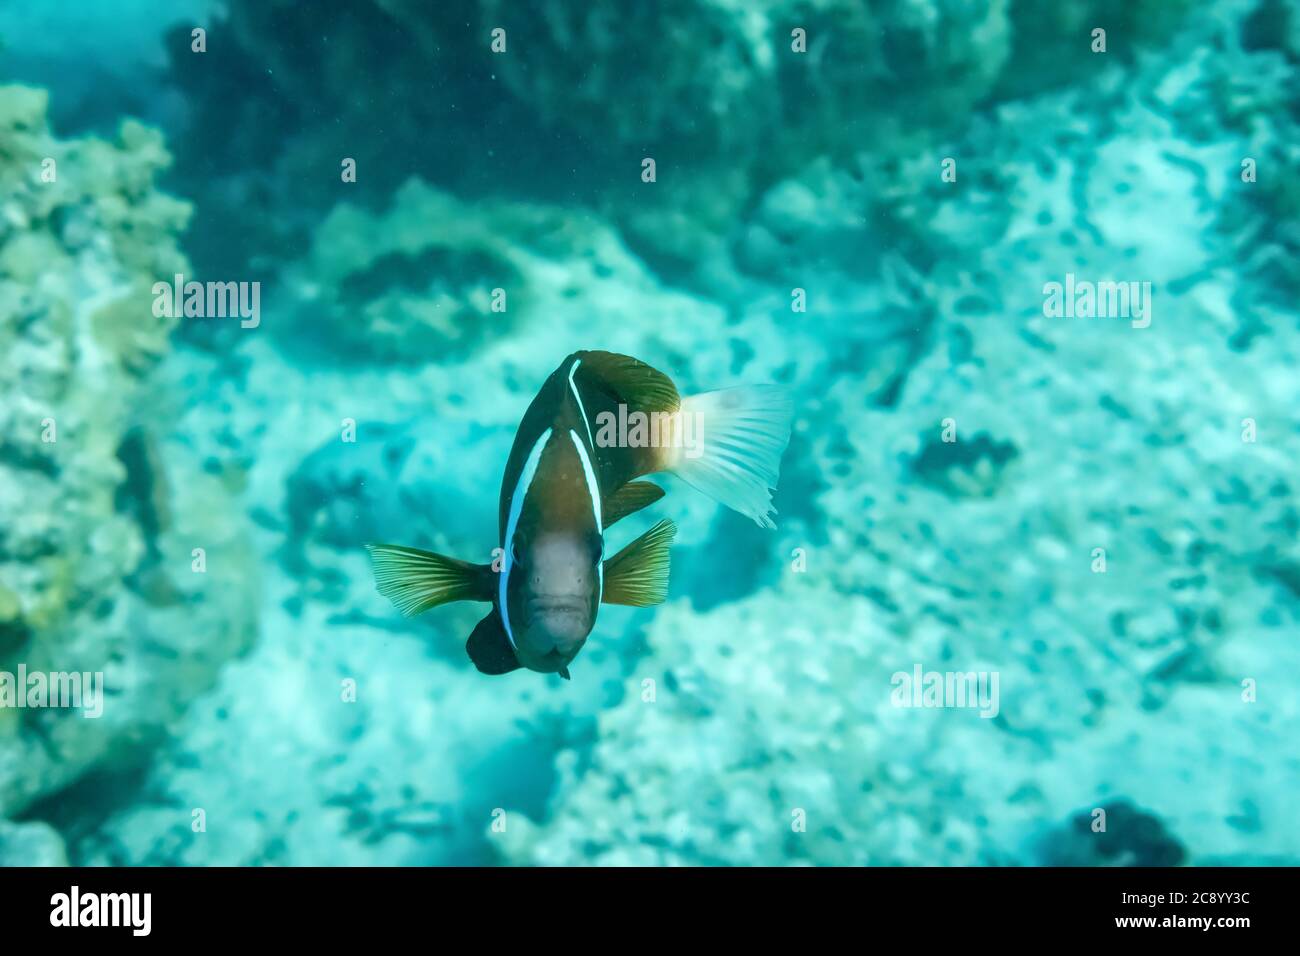 Isolated clown fish in underwater natural environment looking at the camera. Crystal blue water Stock Photo